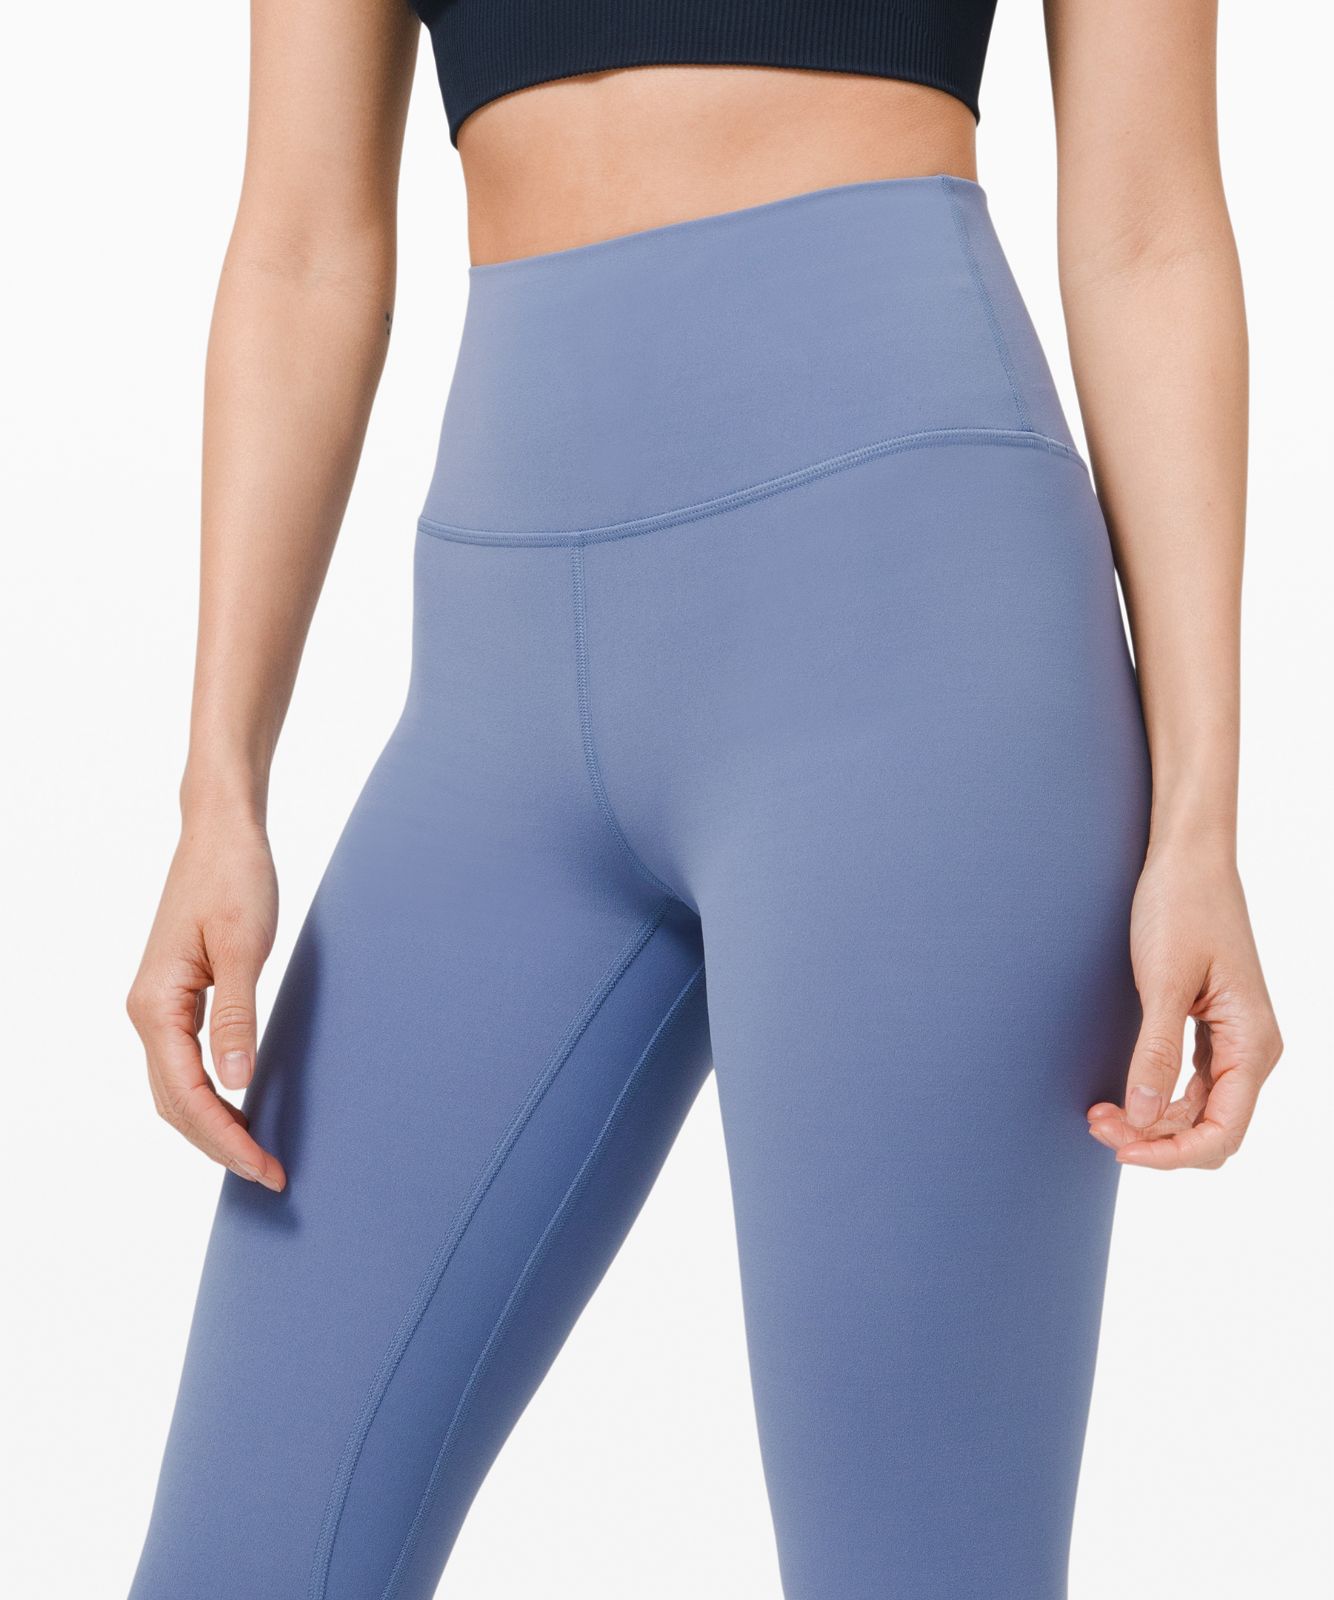 lululemon Align™ High-Rise Pant 24 *Asia Fit, Water Drop